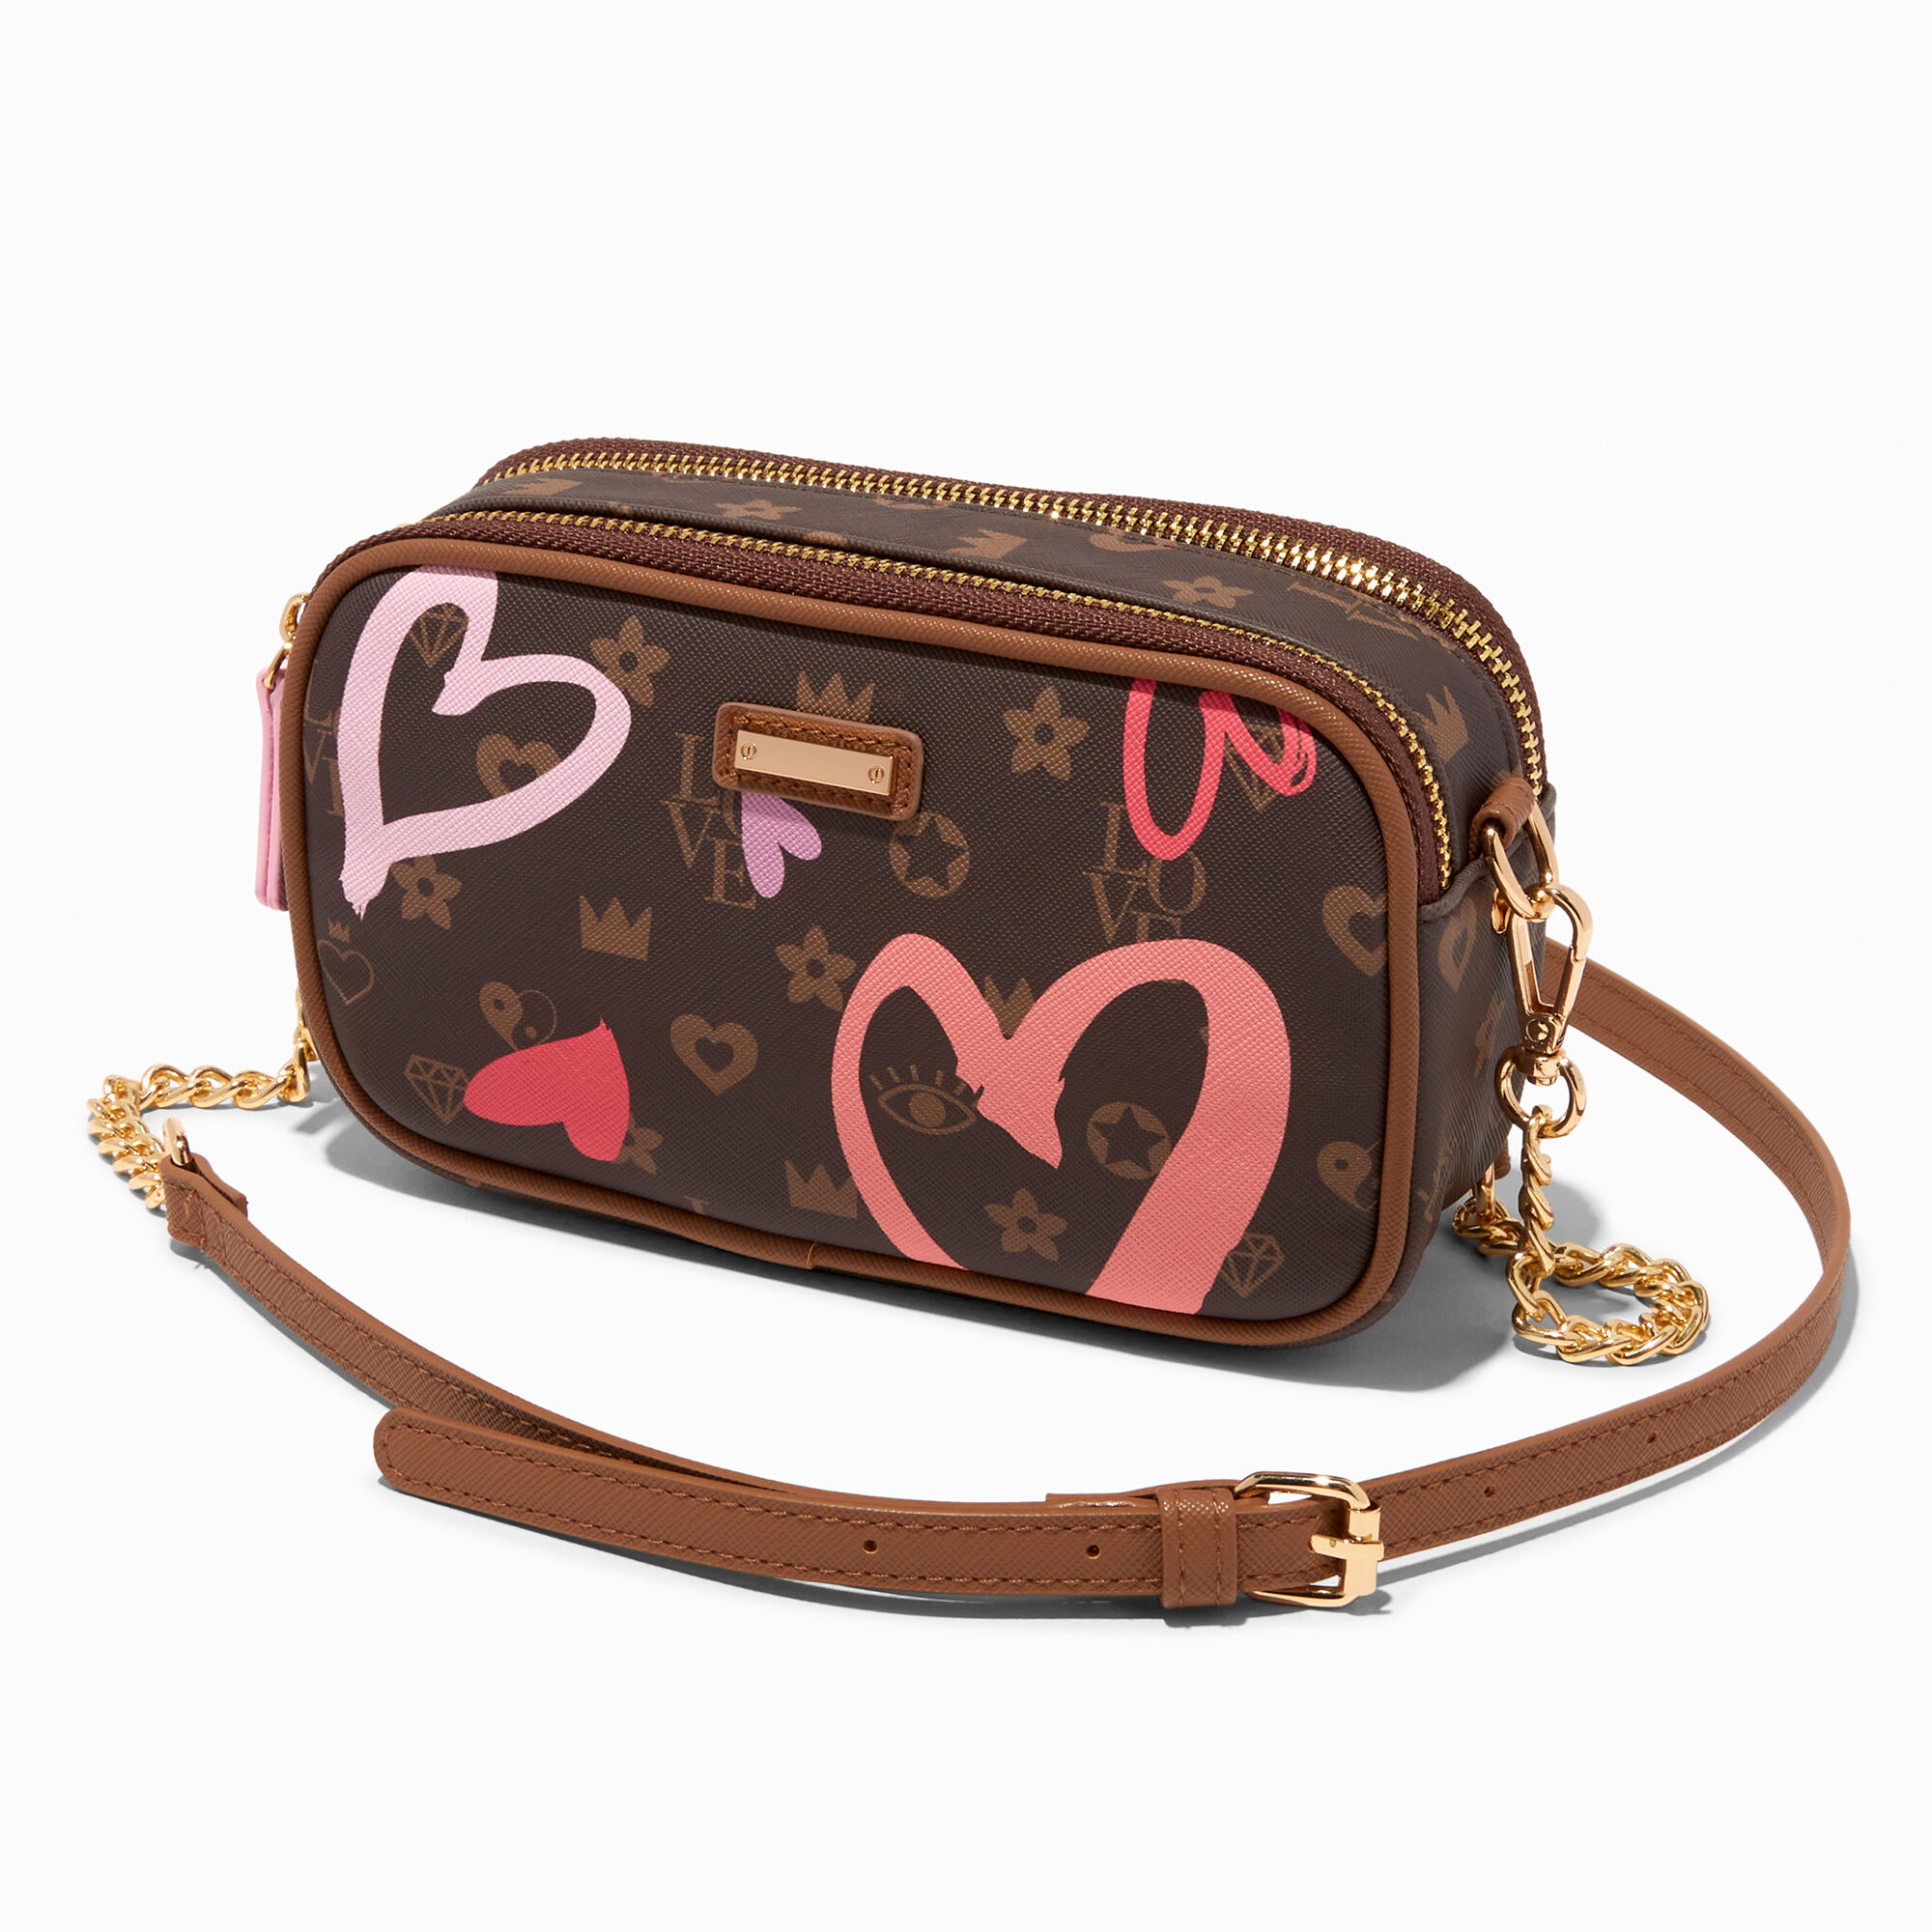 Download Pink Y2K Louis Vuitton With Butterflies Background